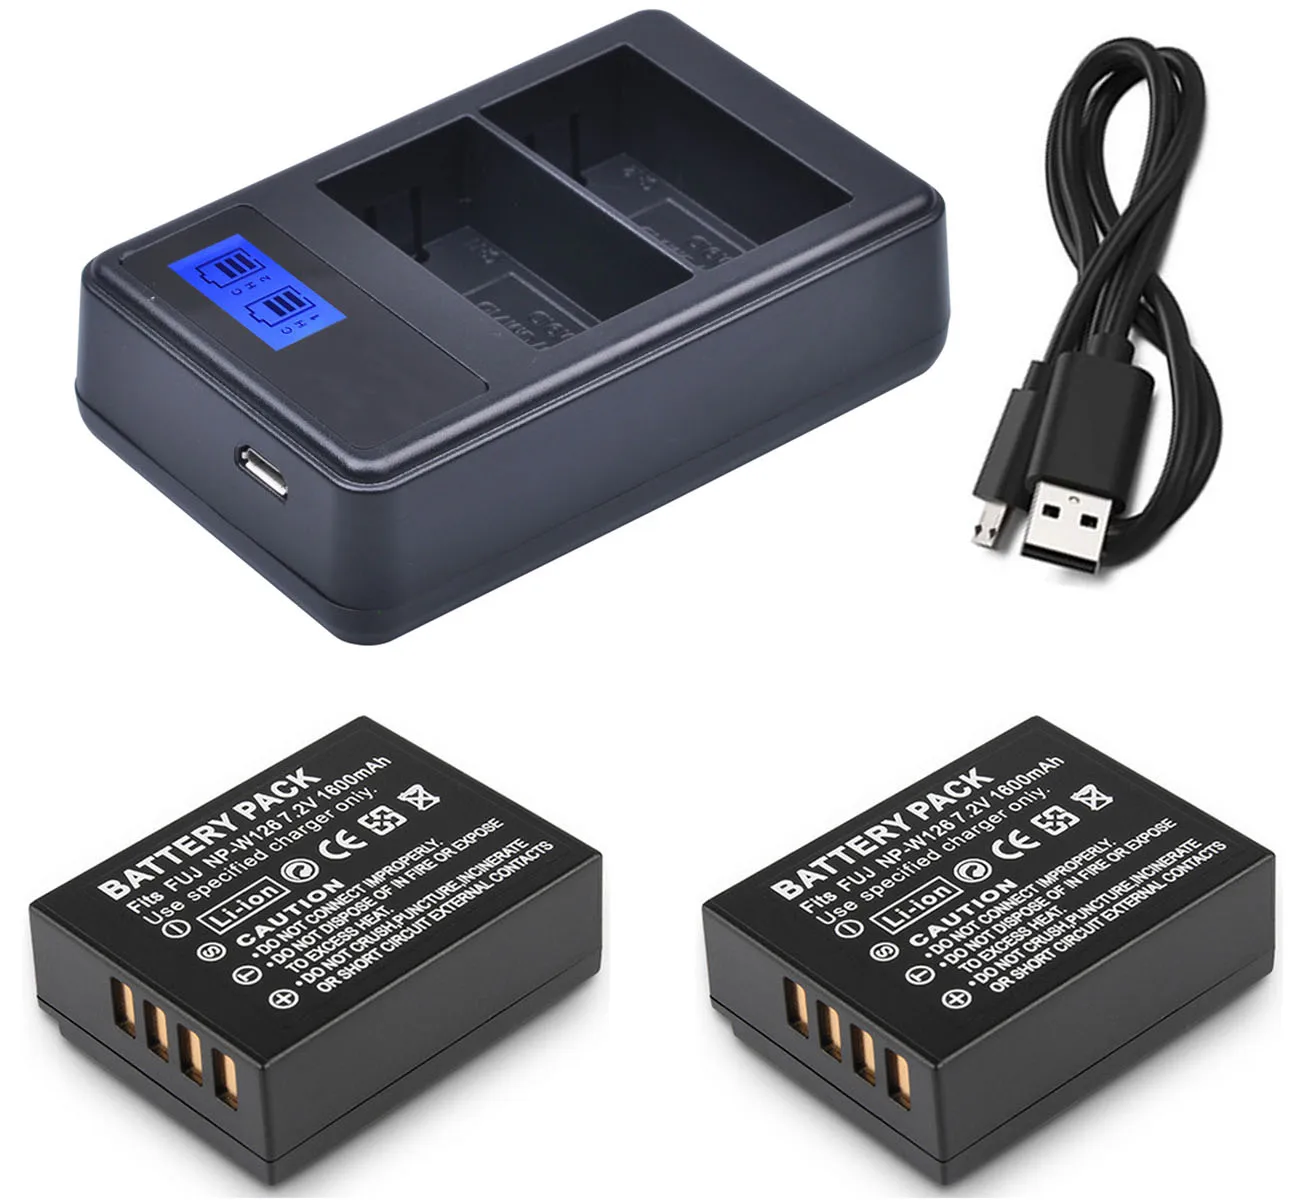 

Battery (2-Pack) + LCD USB Dual Charger for Fujifilm X-H1, X-M1, X-T1, X-T2, X-T3, X-T10, X-T20, X-T30, X-T100 Digital Camera